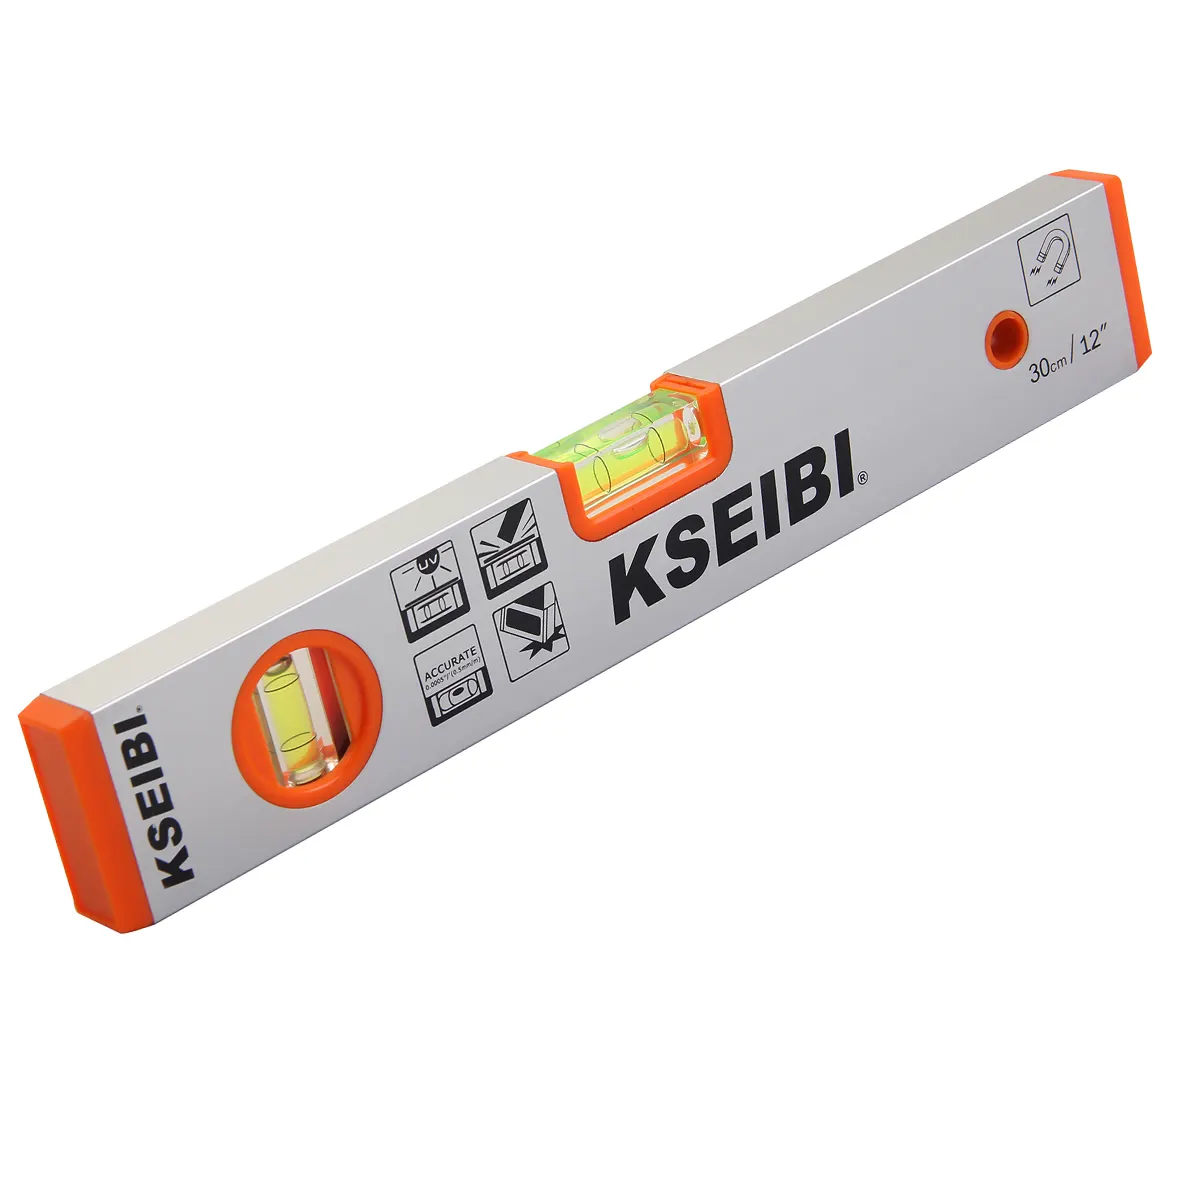 KSEIBI Professional Magnetic Spirit Level With Two Vails Avm